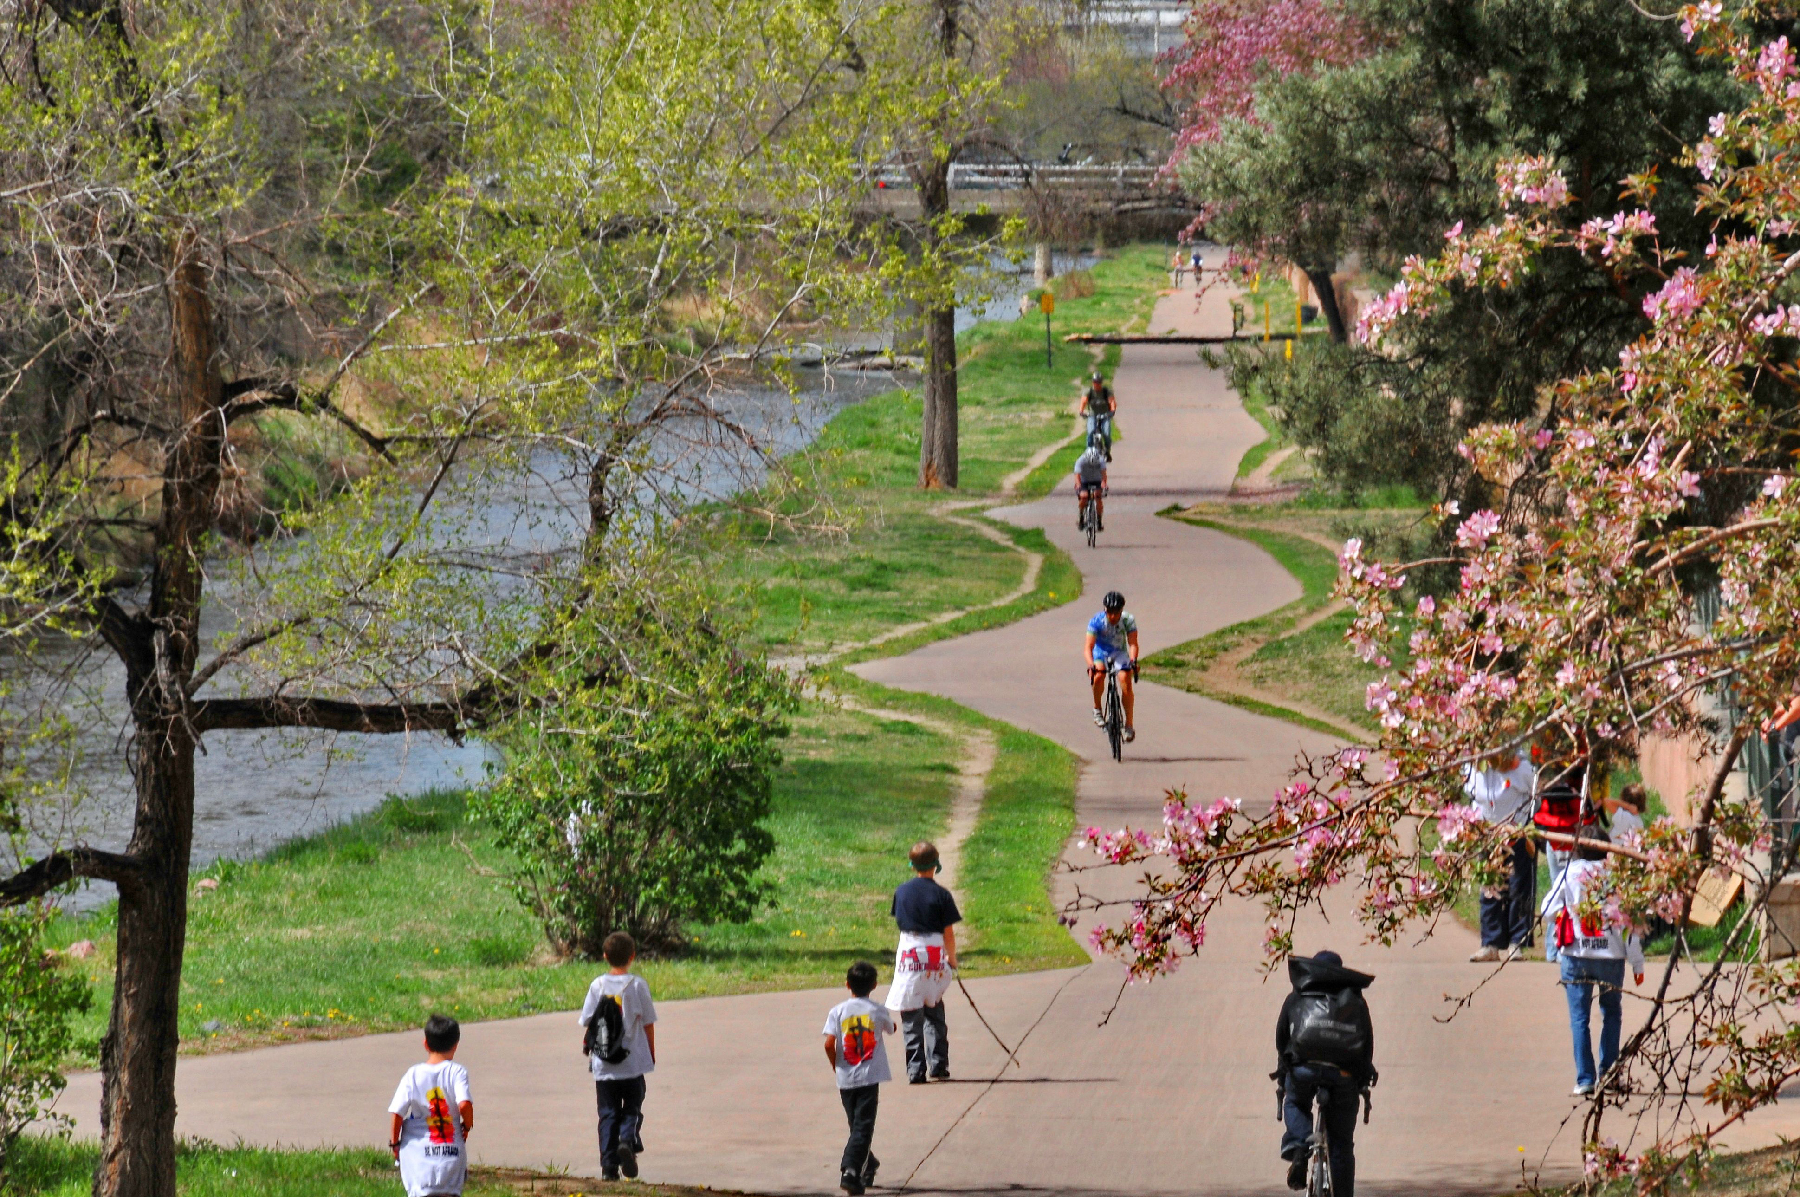 People walking and riding bokes in Cherry Creek Trail in Denver, Colorado